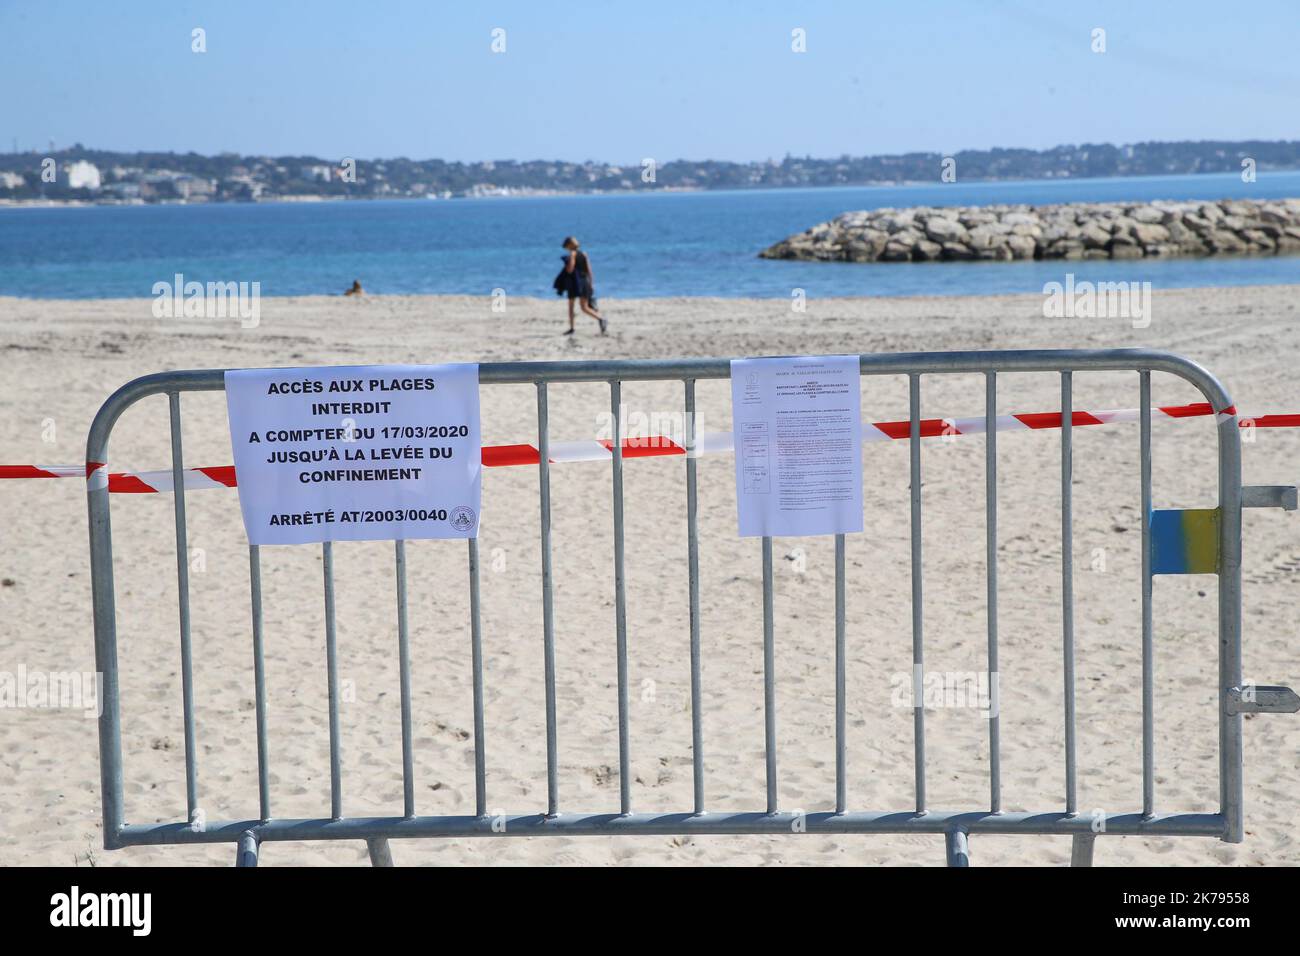 A general view of the French Riviera beach as a ban on access to the beaches of Golfe-Juan Vallauris is introduced due to the Coronavirus epidemic Stock Photo